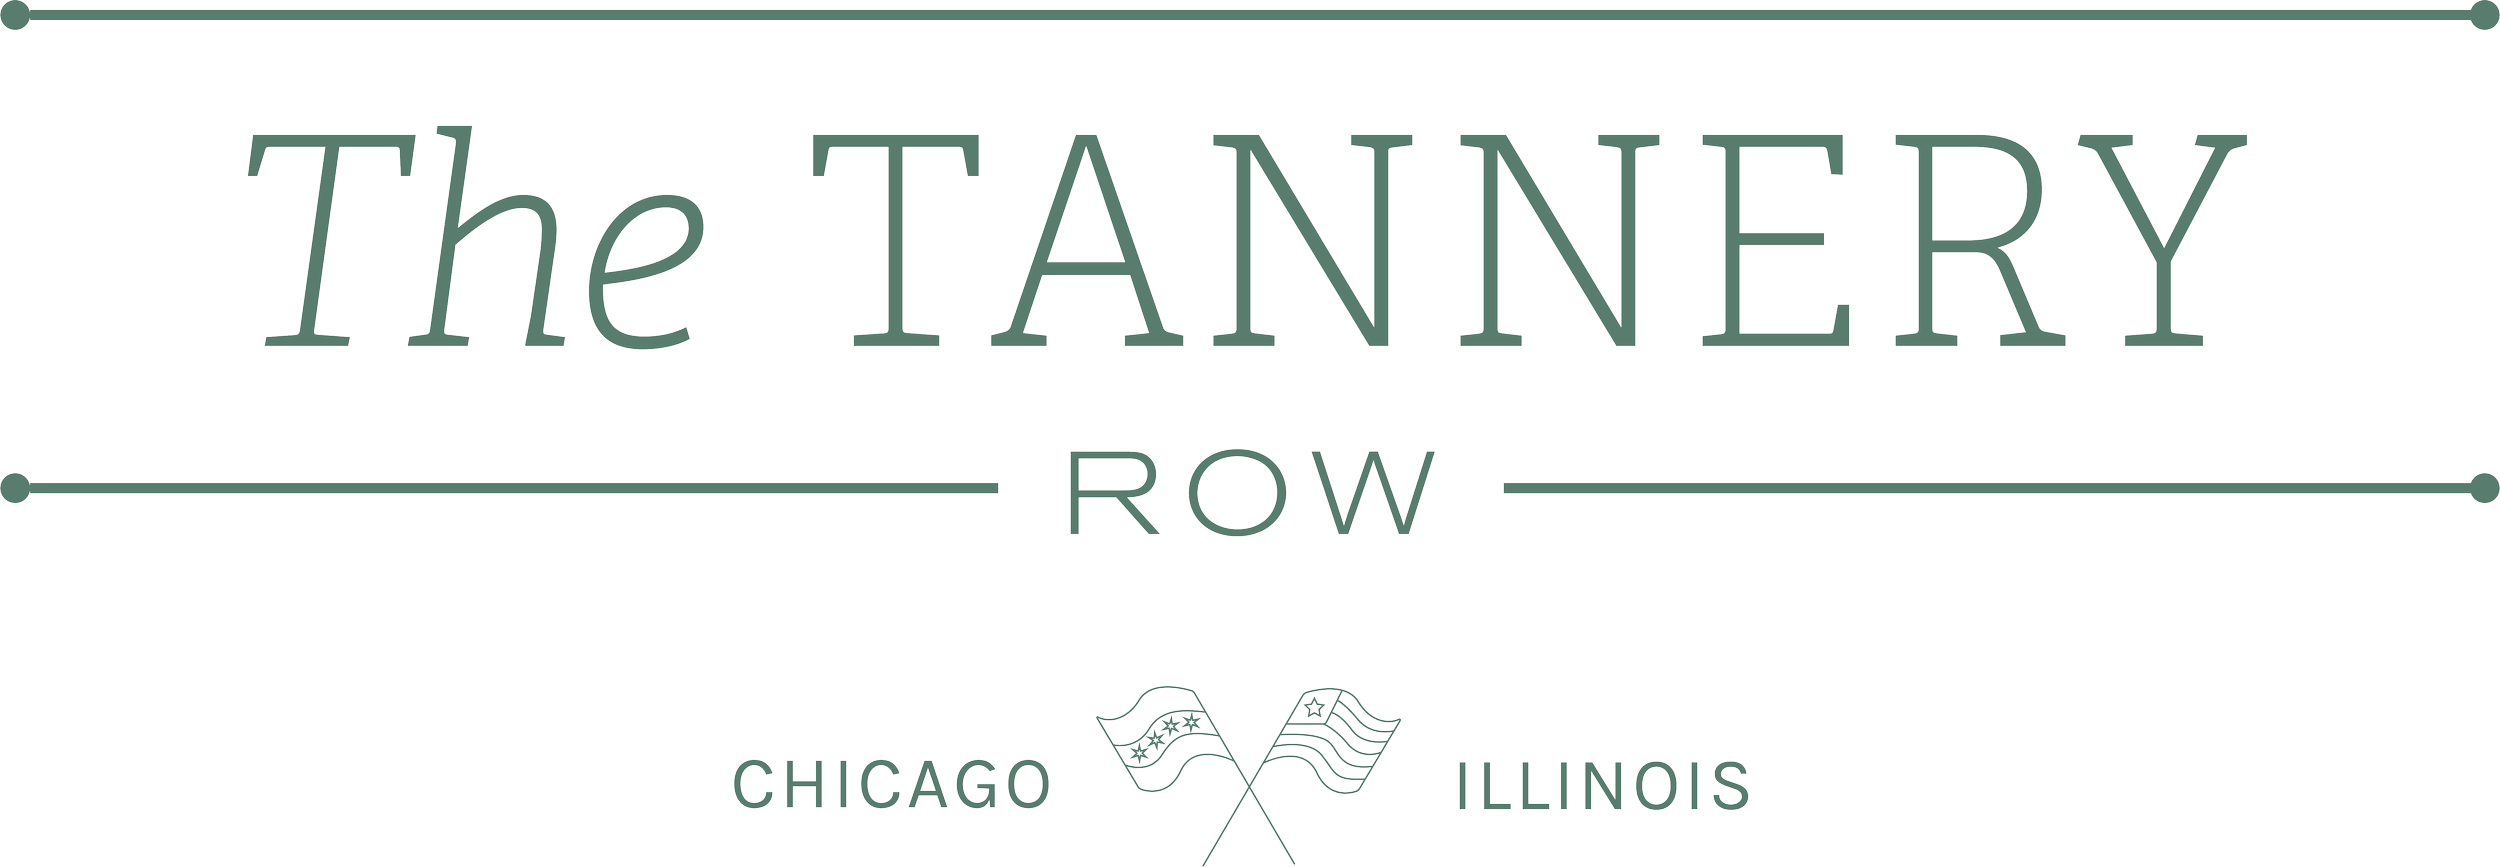 1 The Tannery Row Chicago Logo - Green.png